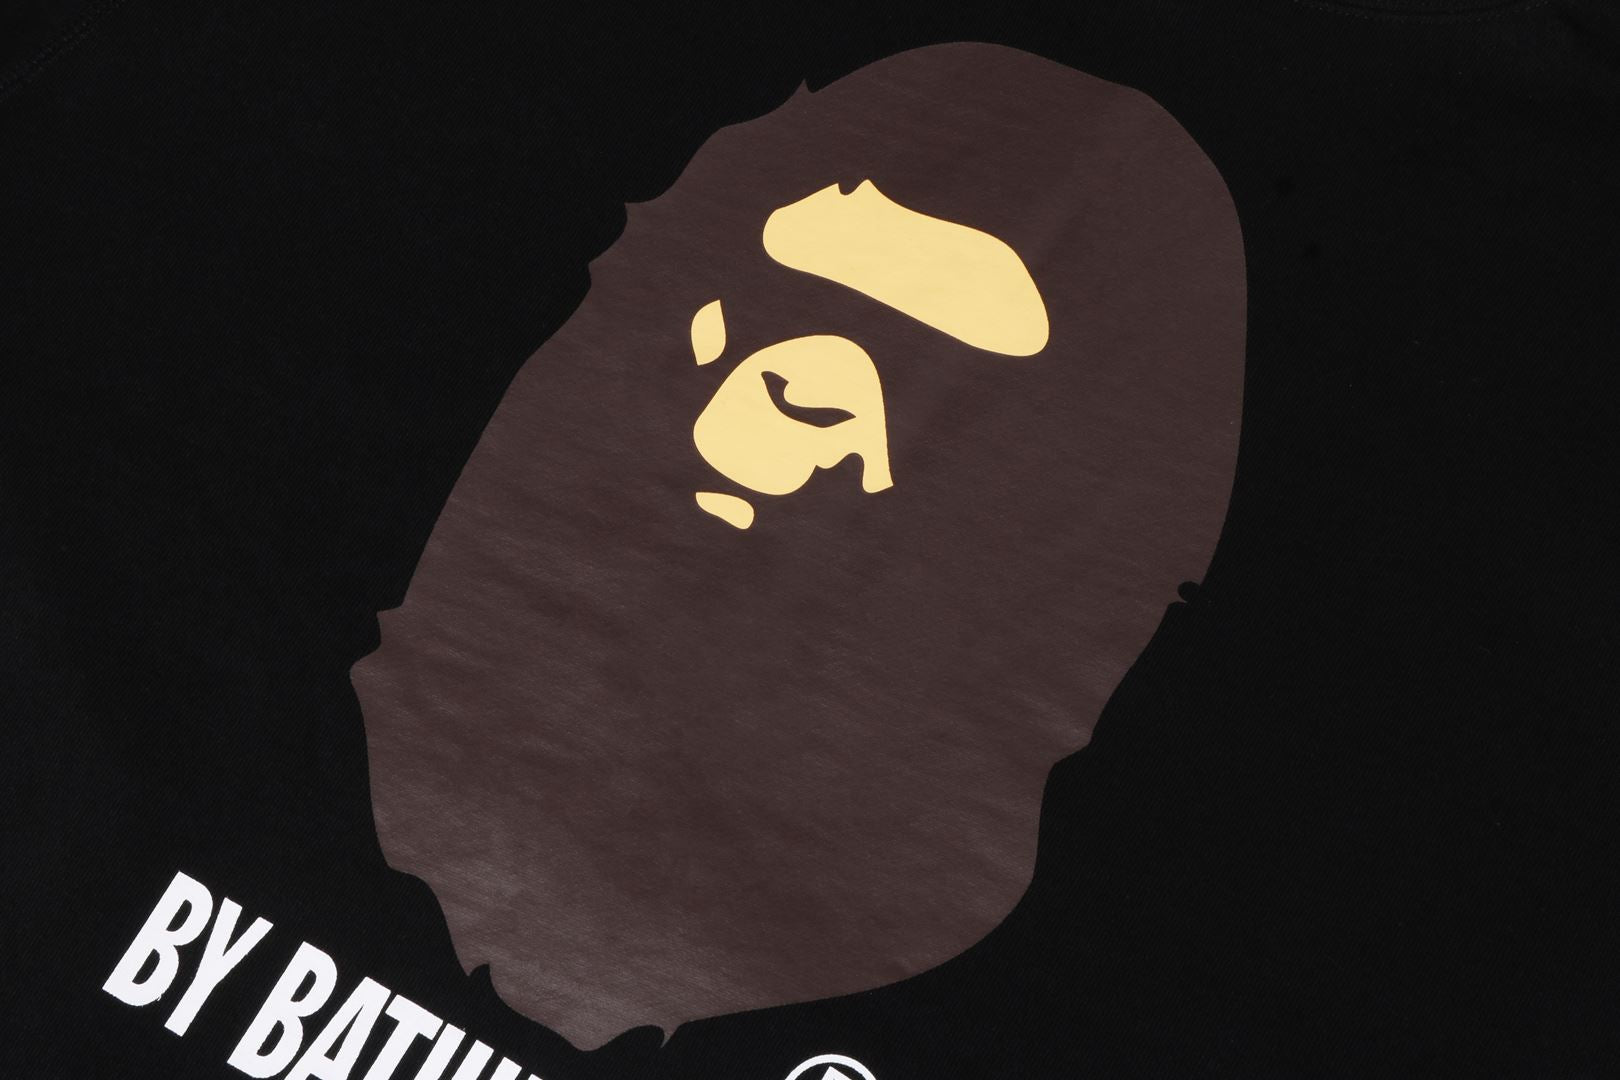 BY BATHING APE RELAXED PULLOVER HOODIE – uk.bape.com